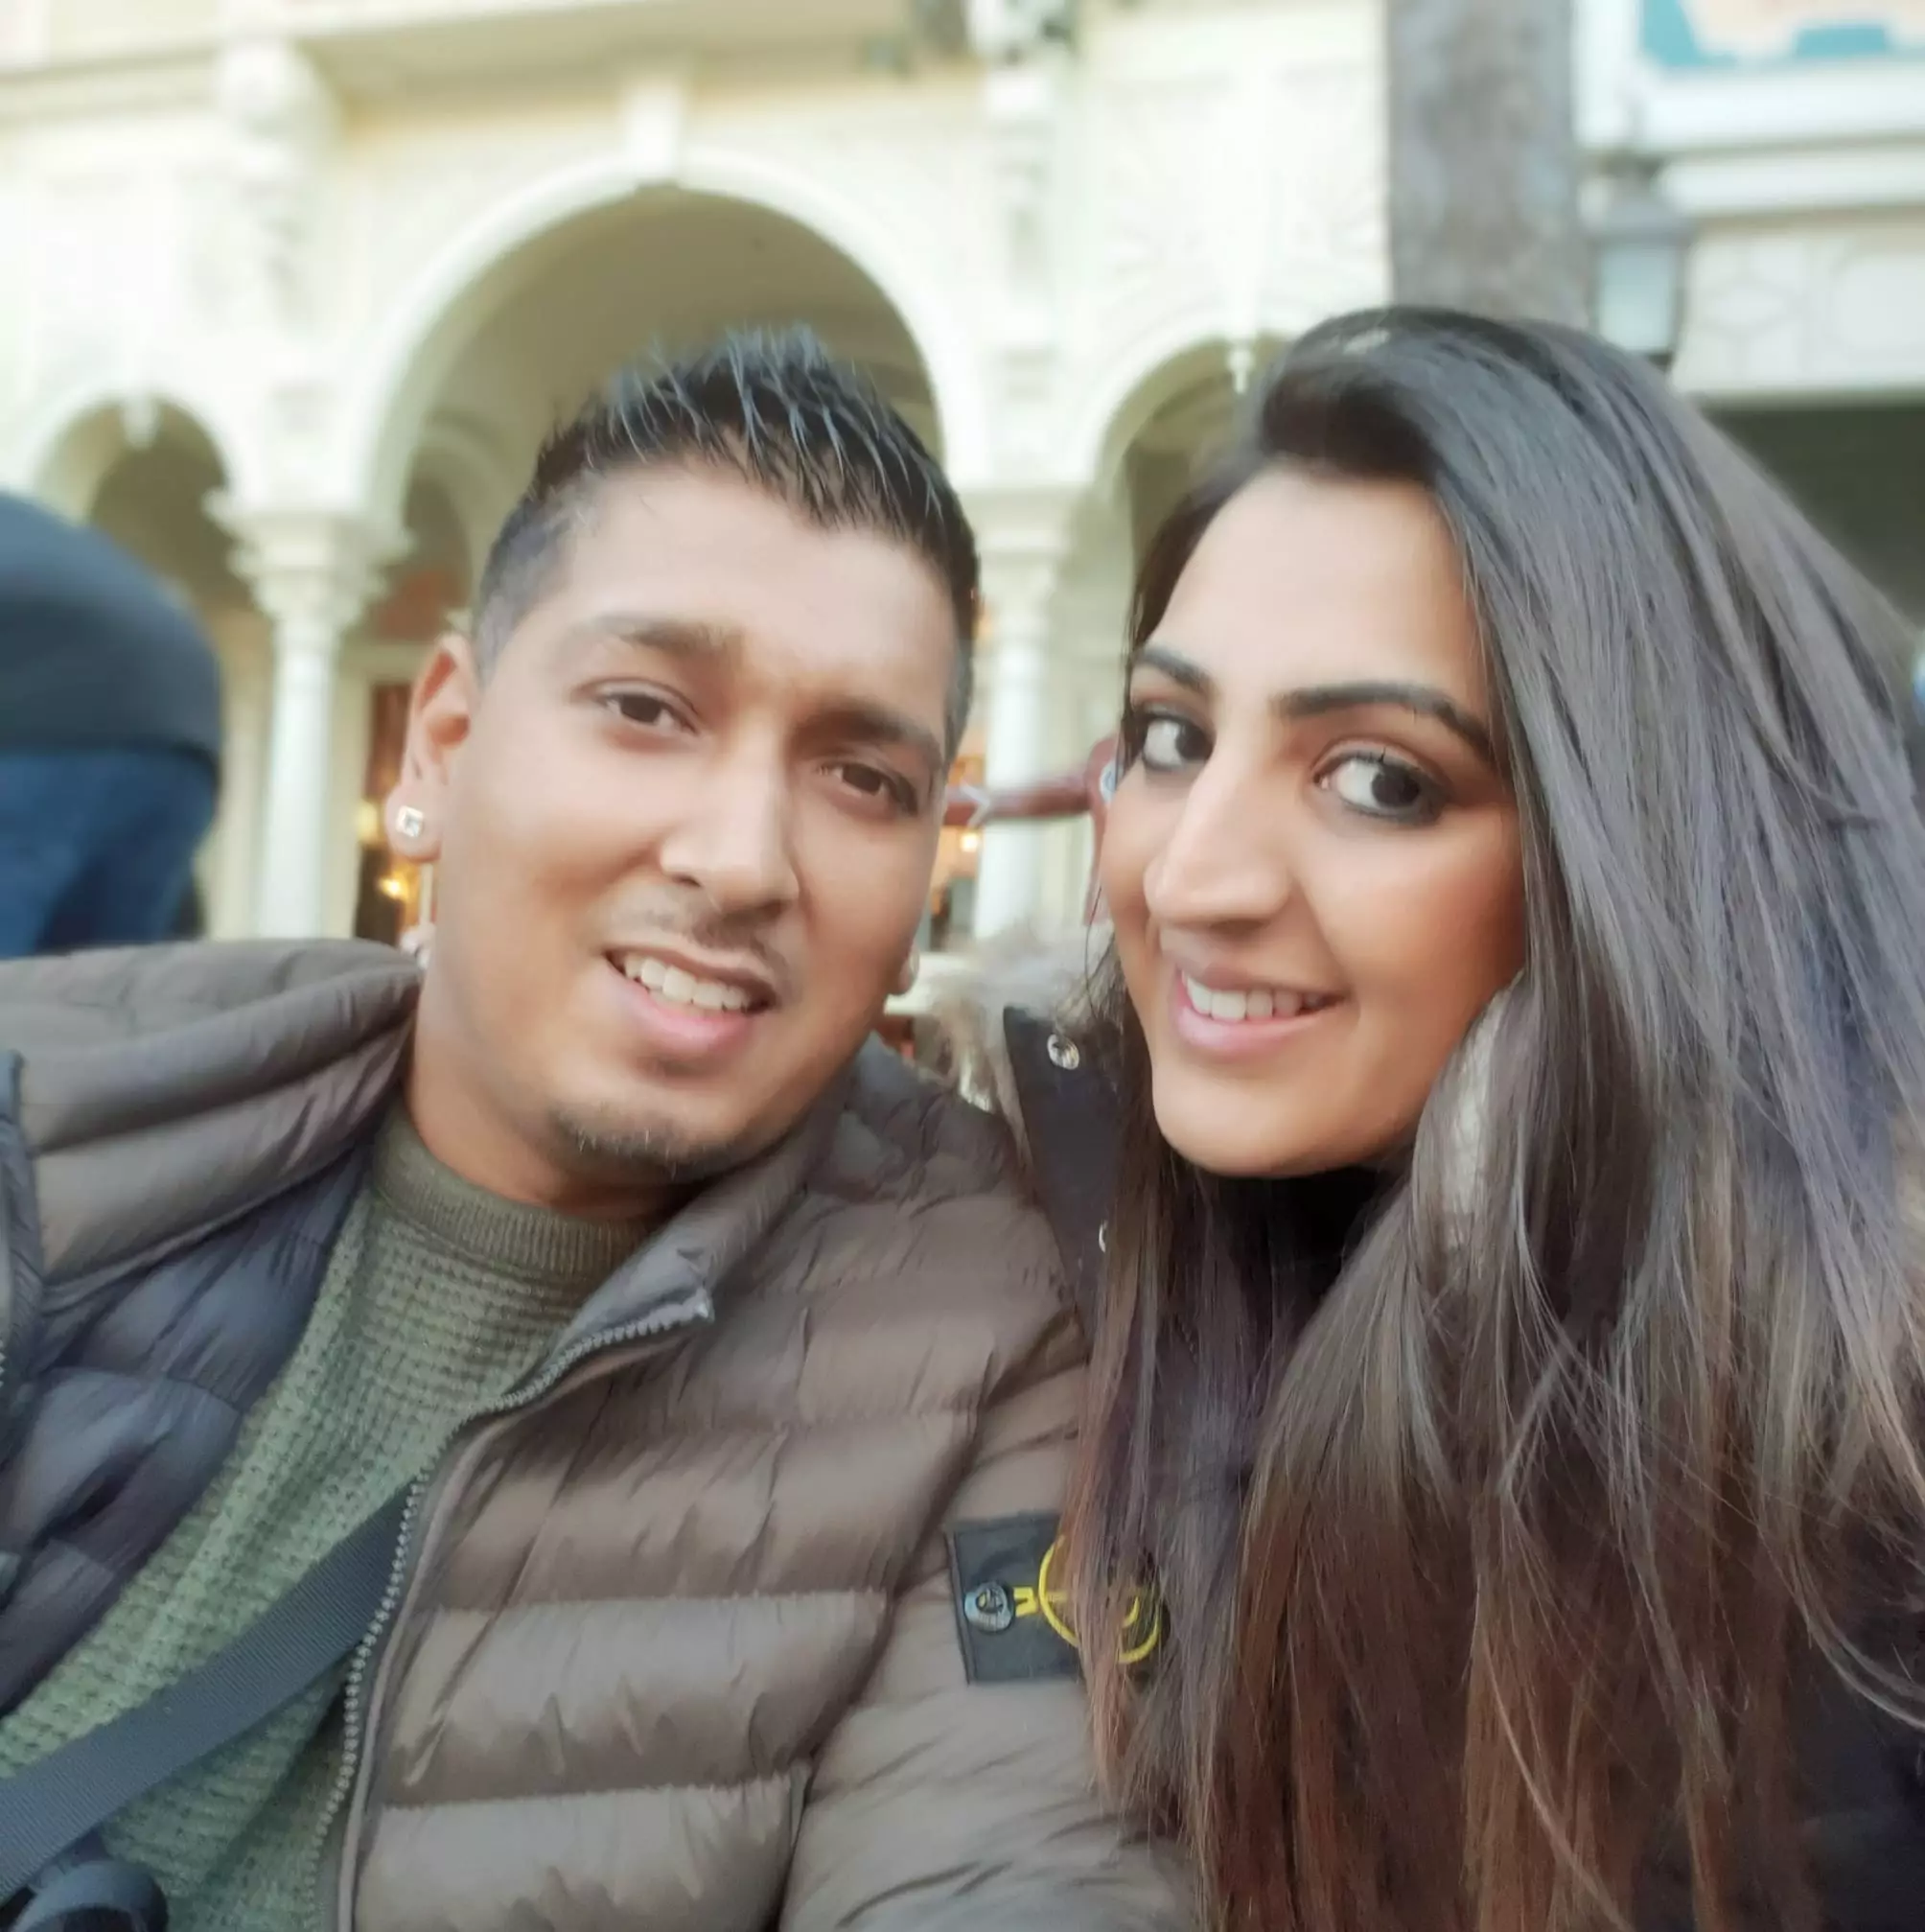 Sareena and Ajay Suman were refused from viewing their 'dream' family home.